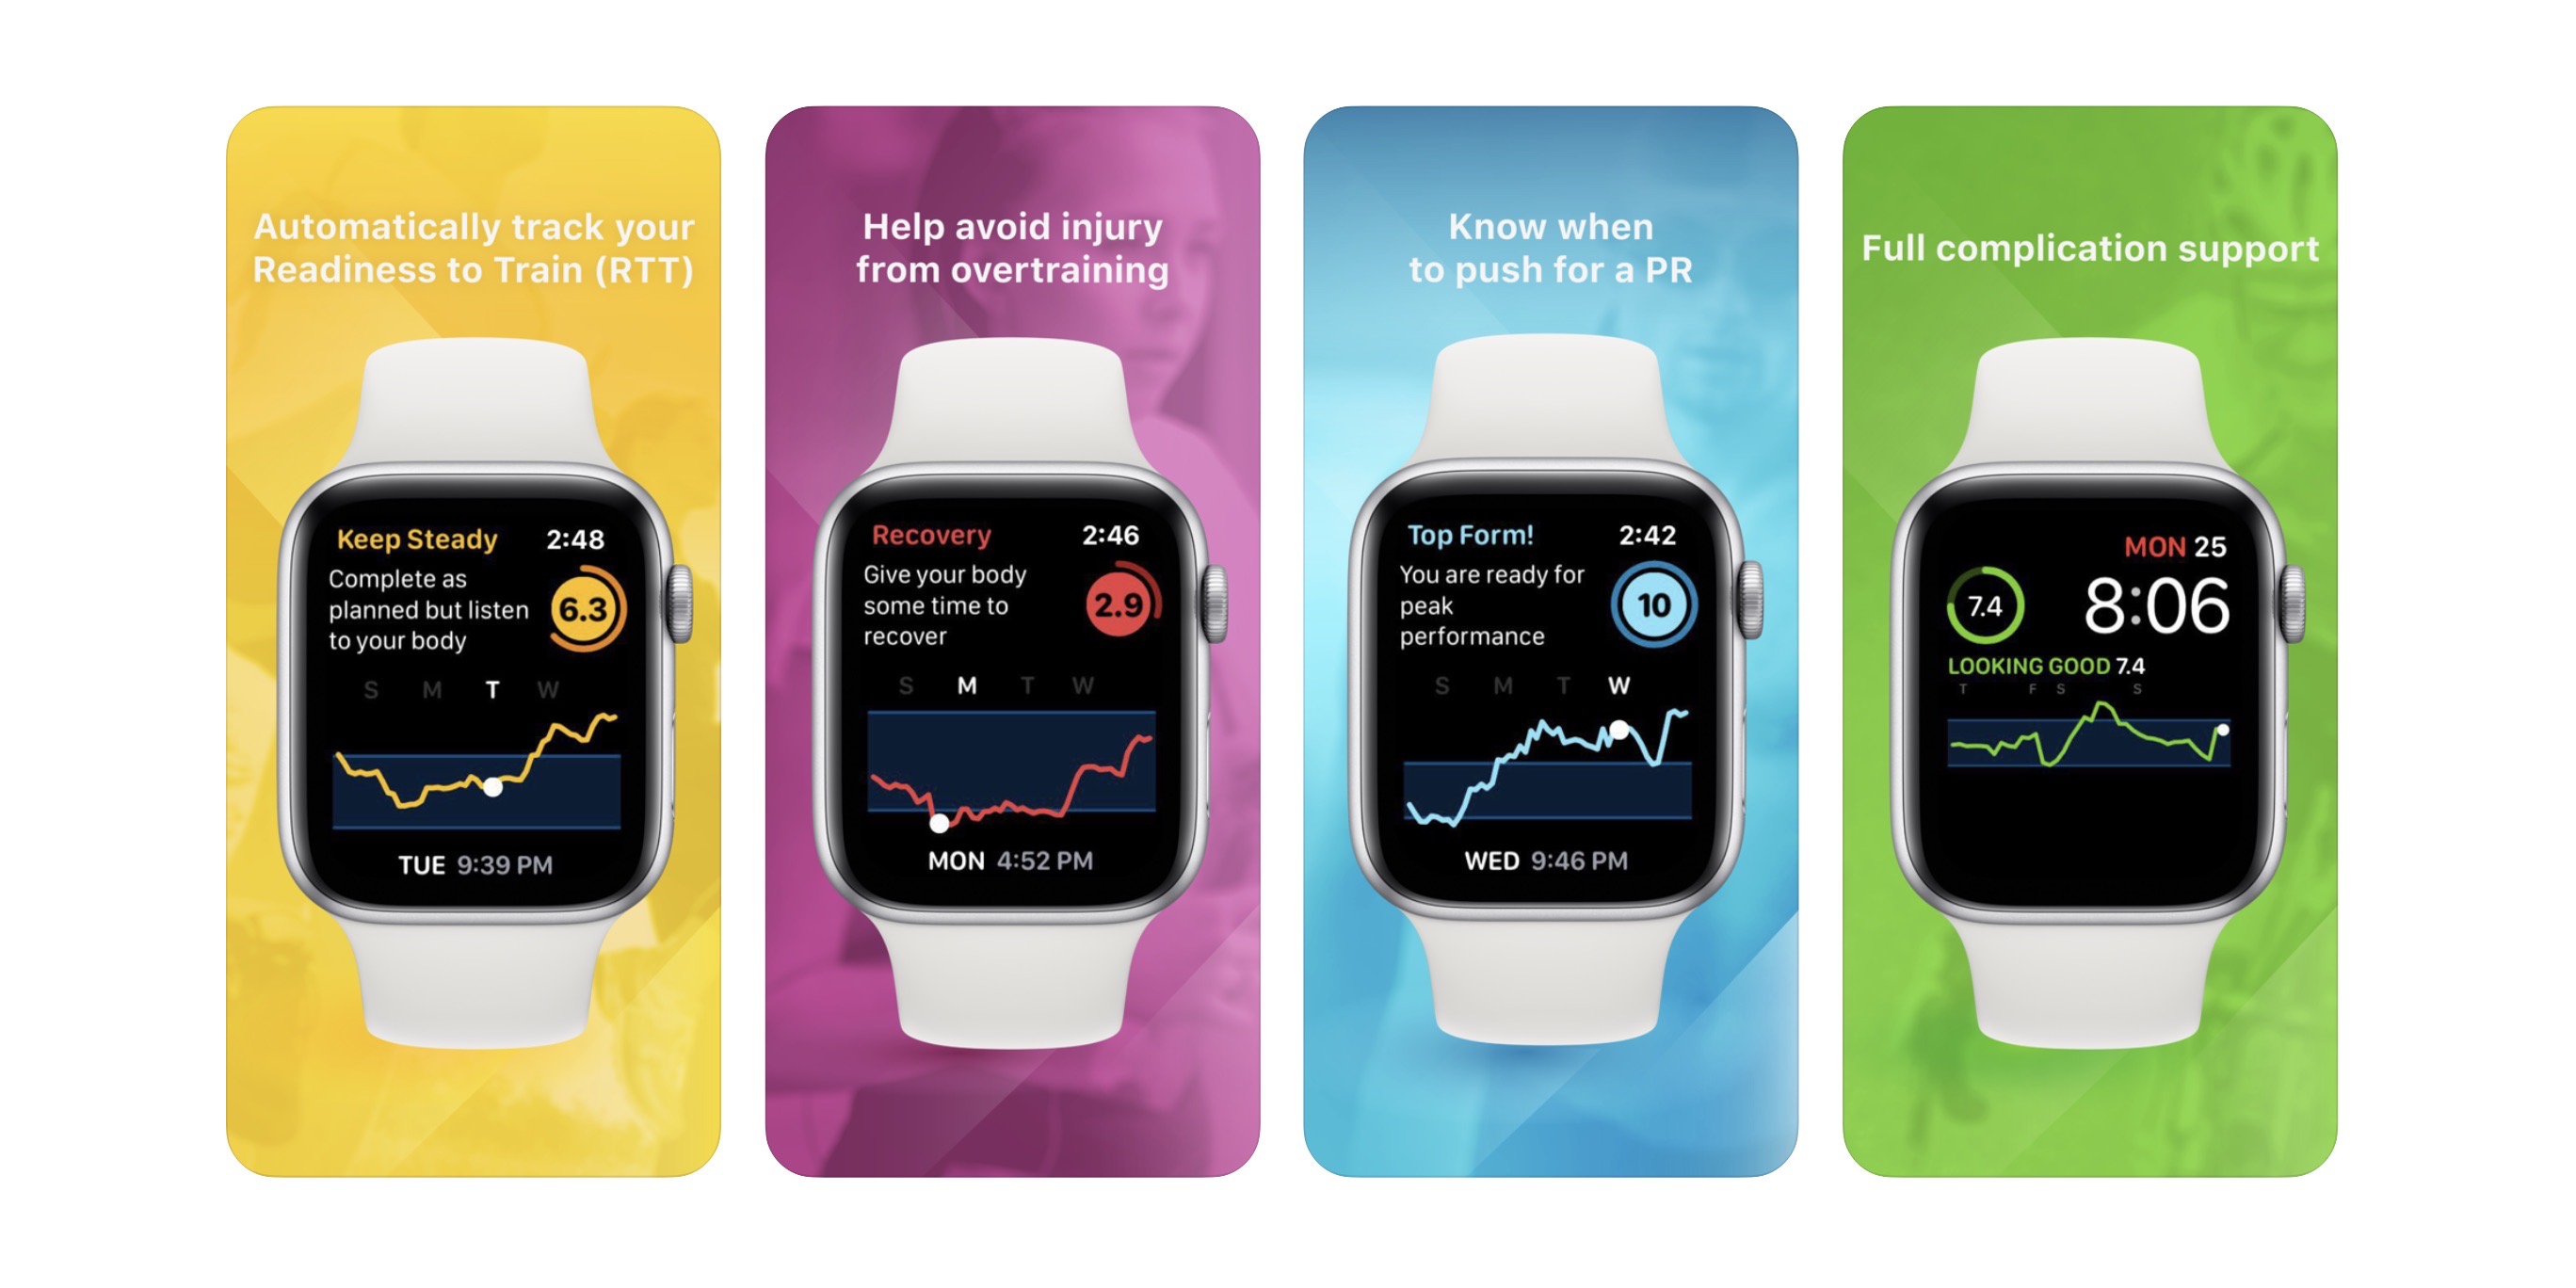 Apple Watch Training Today App - Use HRV with Apple Watch and iPhone